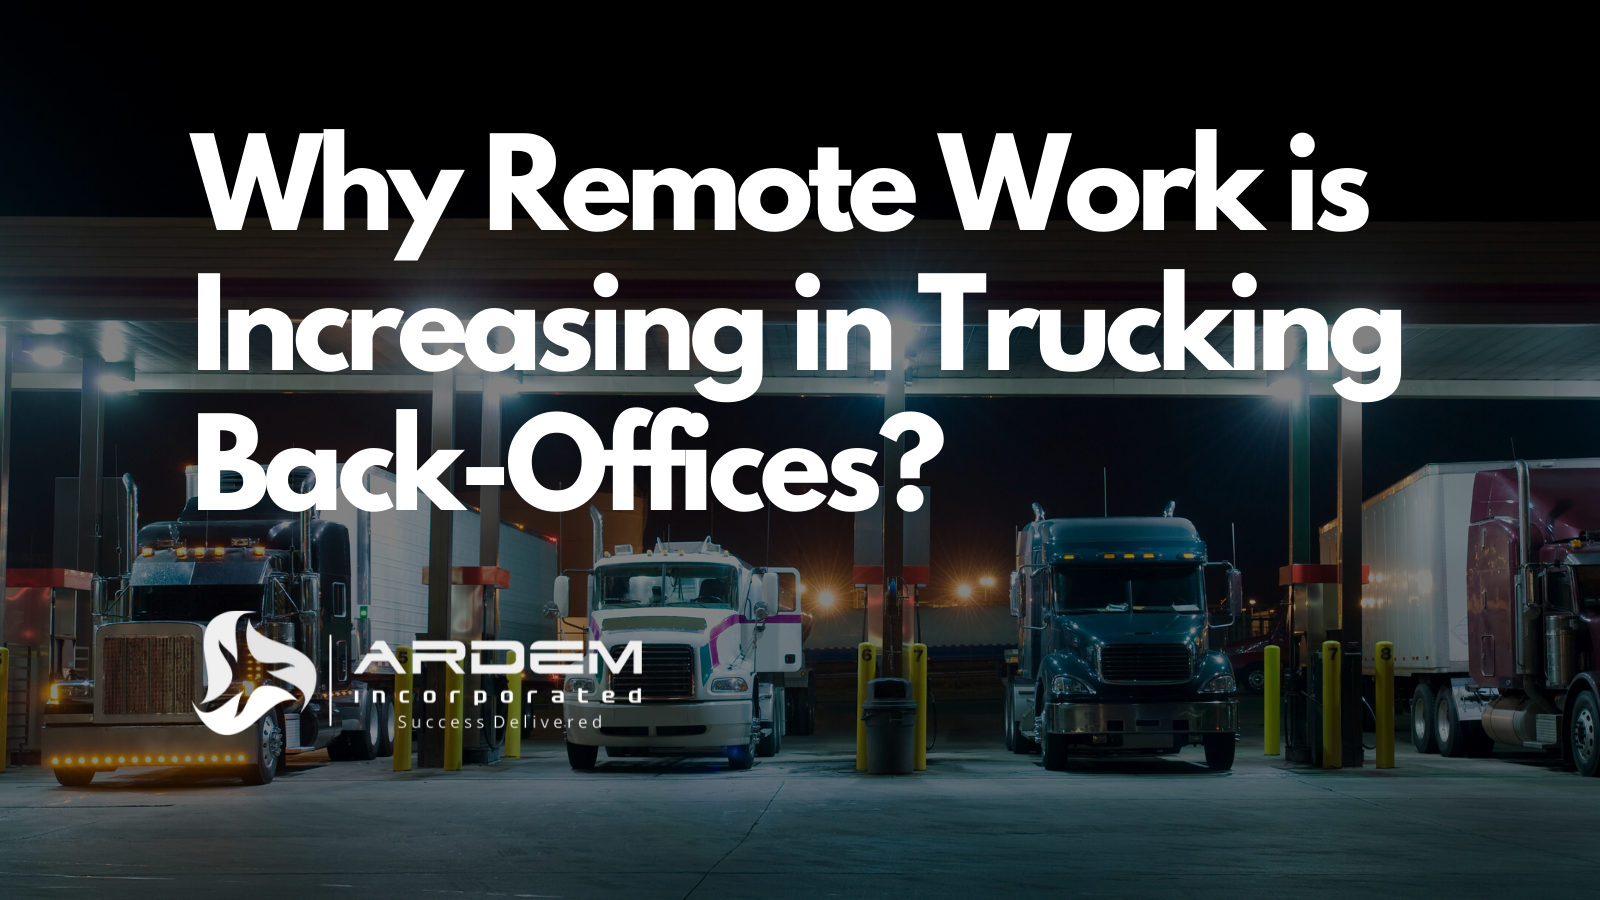 remote work outsourcing trucking back offices blog